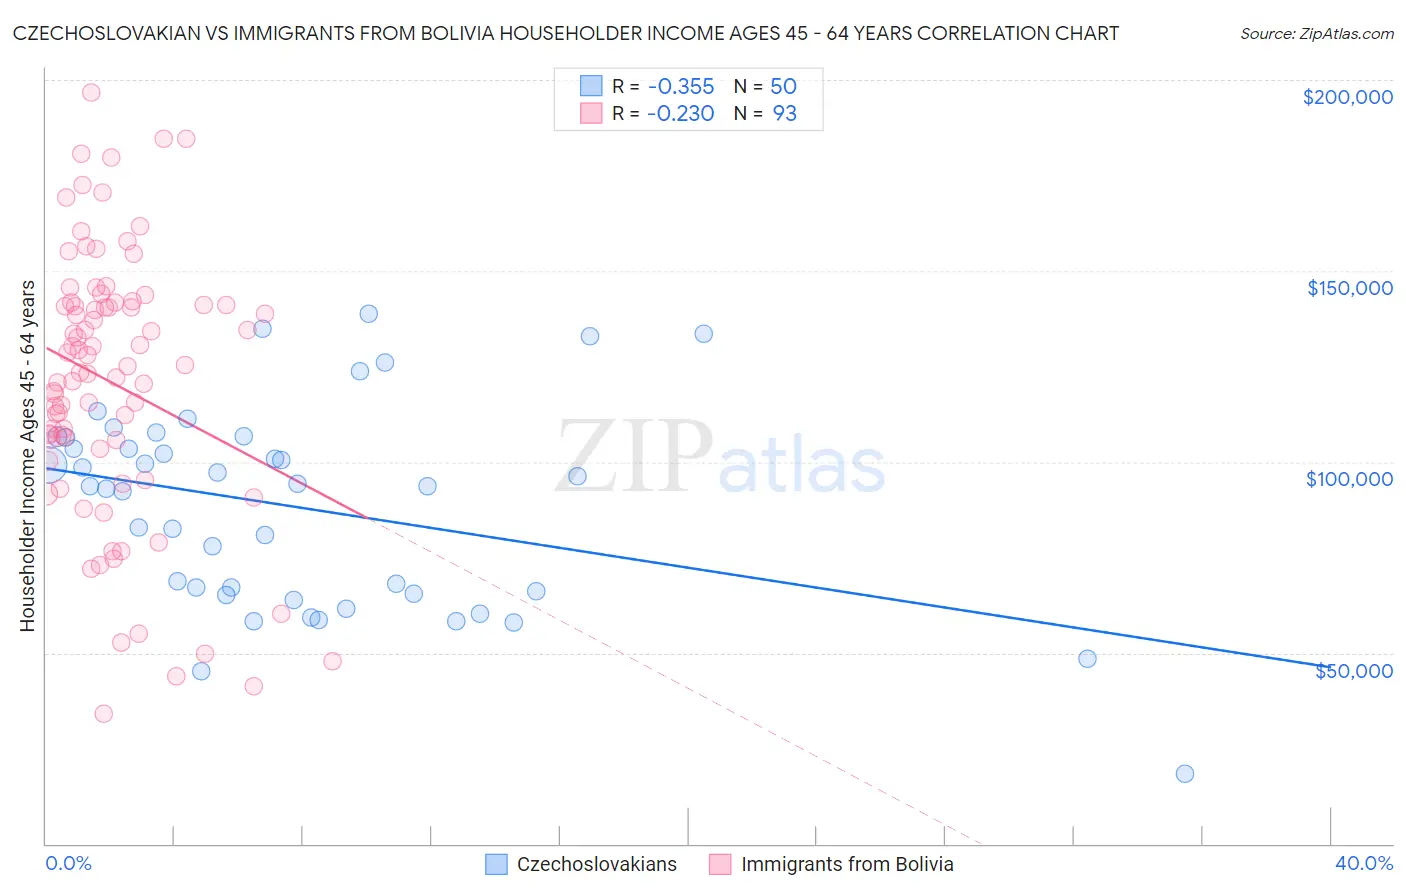 Czechoslovakian vs Immigrants from Bolivia Householder Income Ages 45 - 64 years